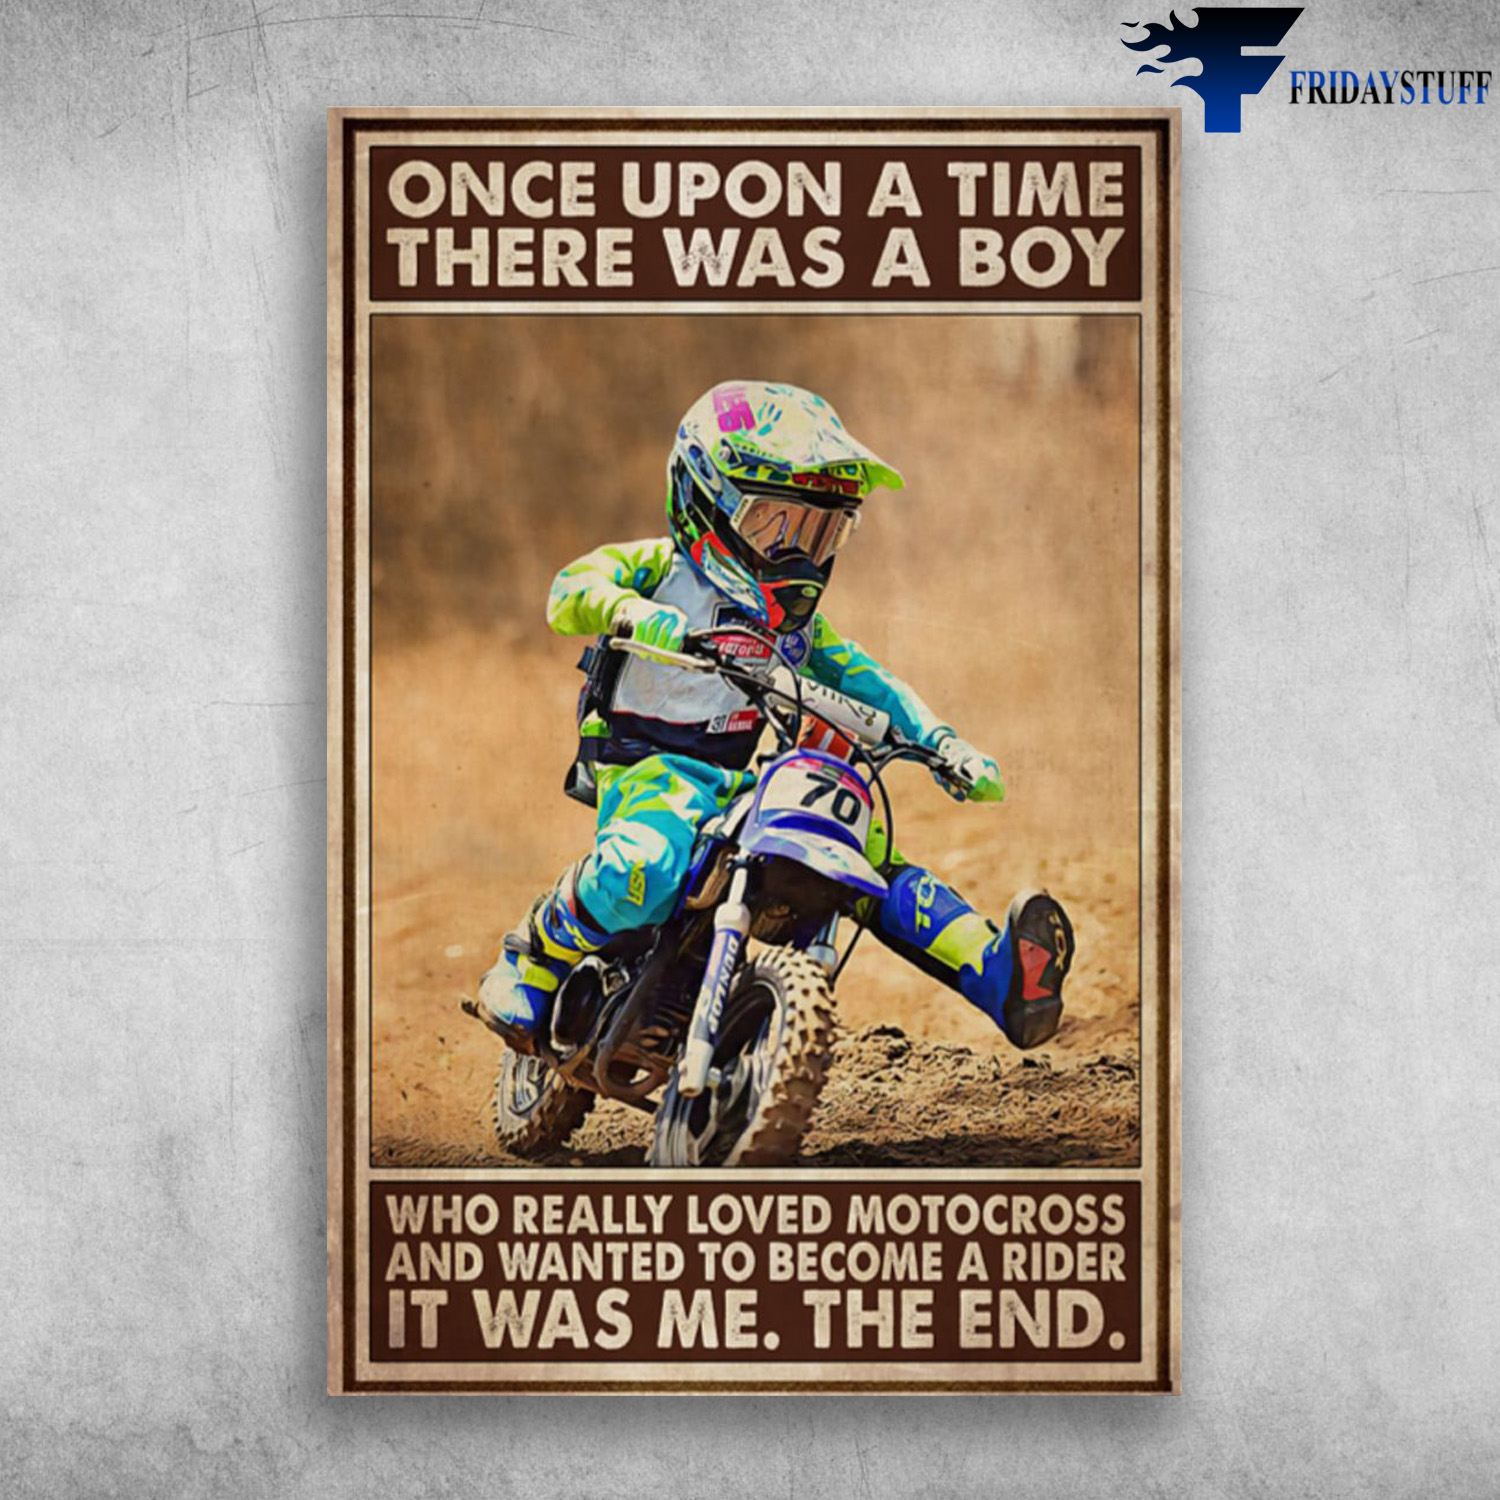 The Boy Love Motocross - Once Upon A Time, There Was A Boy, Who Really Loved Motocross